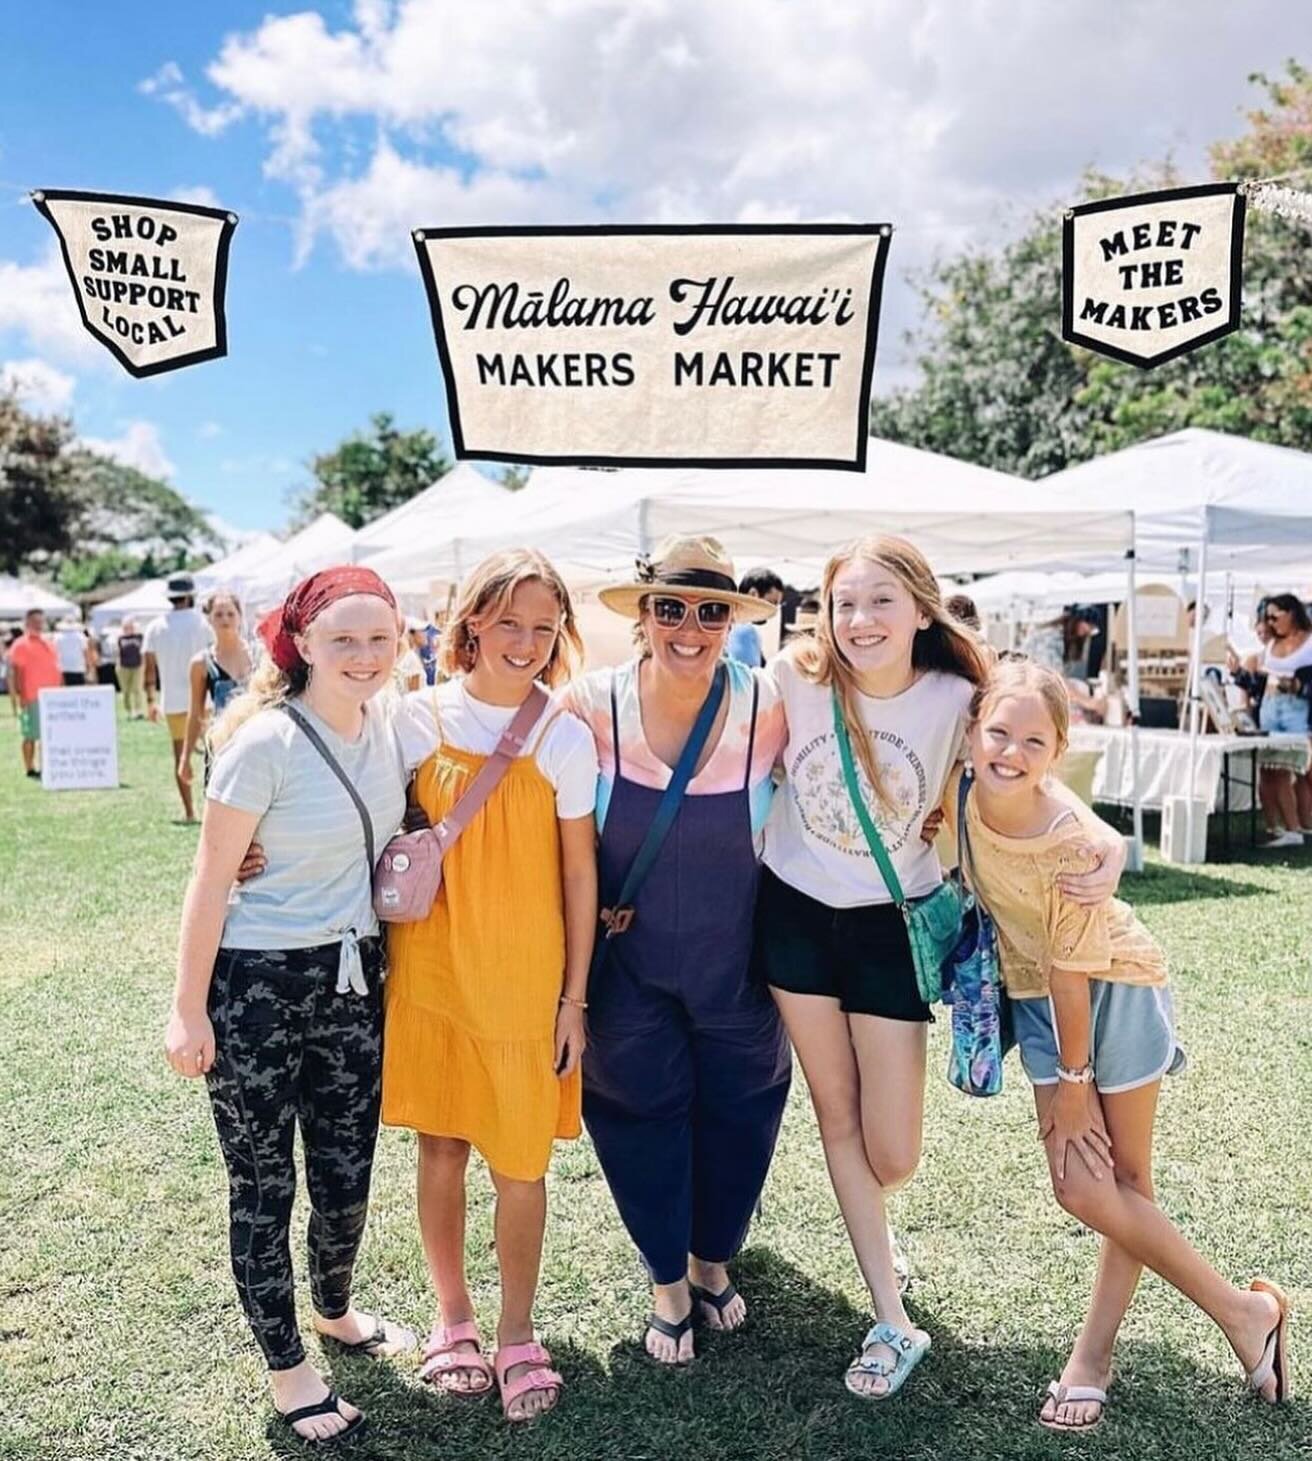 Meet me at the market! ☀️

What better way to start your Saturday? 📆 Find our colorful banners on your way to the beach, tell a friend, and come support local makers and small businesses!

We have three locations every month:
📍 Koko Head Elementary